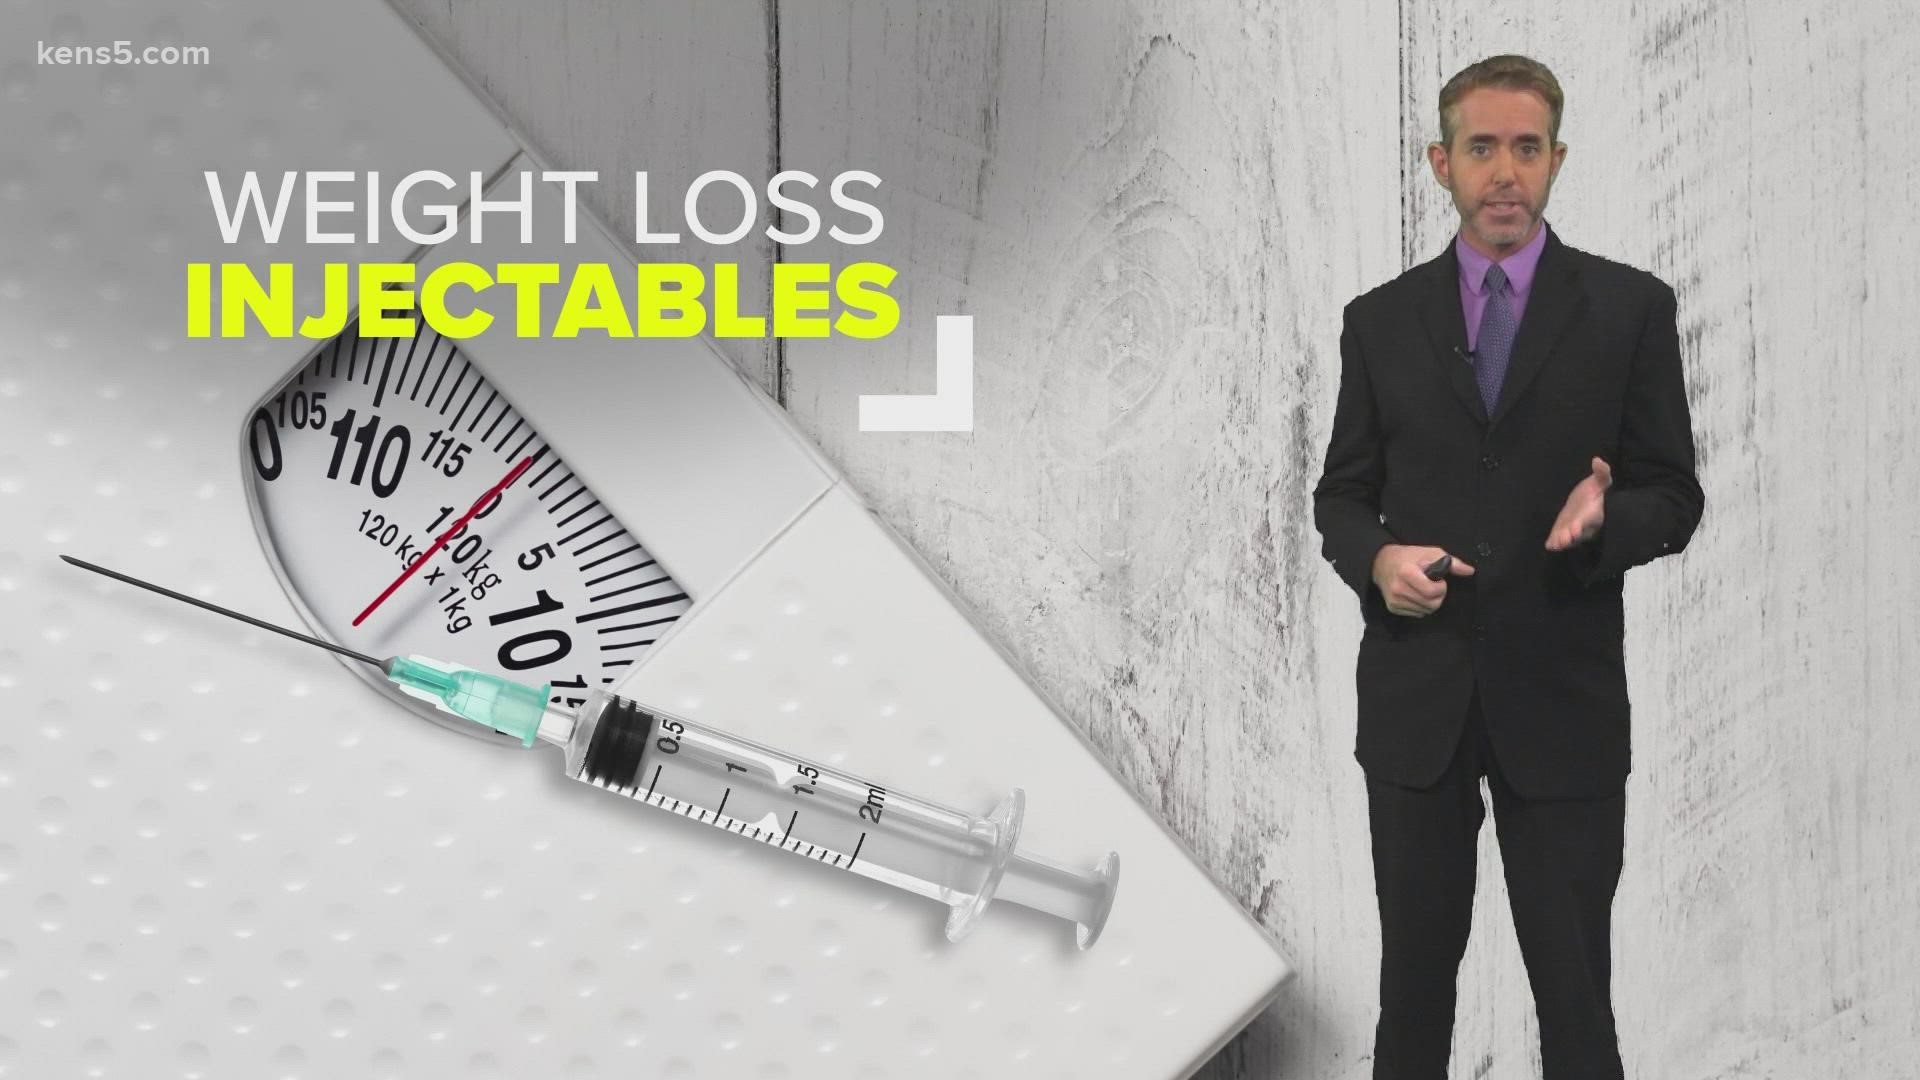 The injectable medication was the first weight loss medication approved by the FDA in seven years.